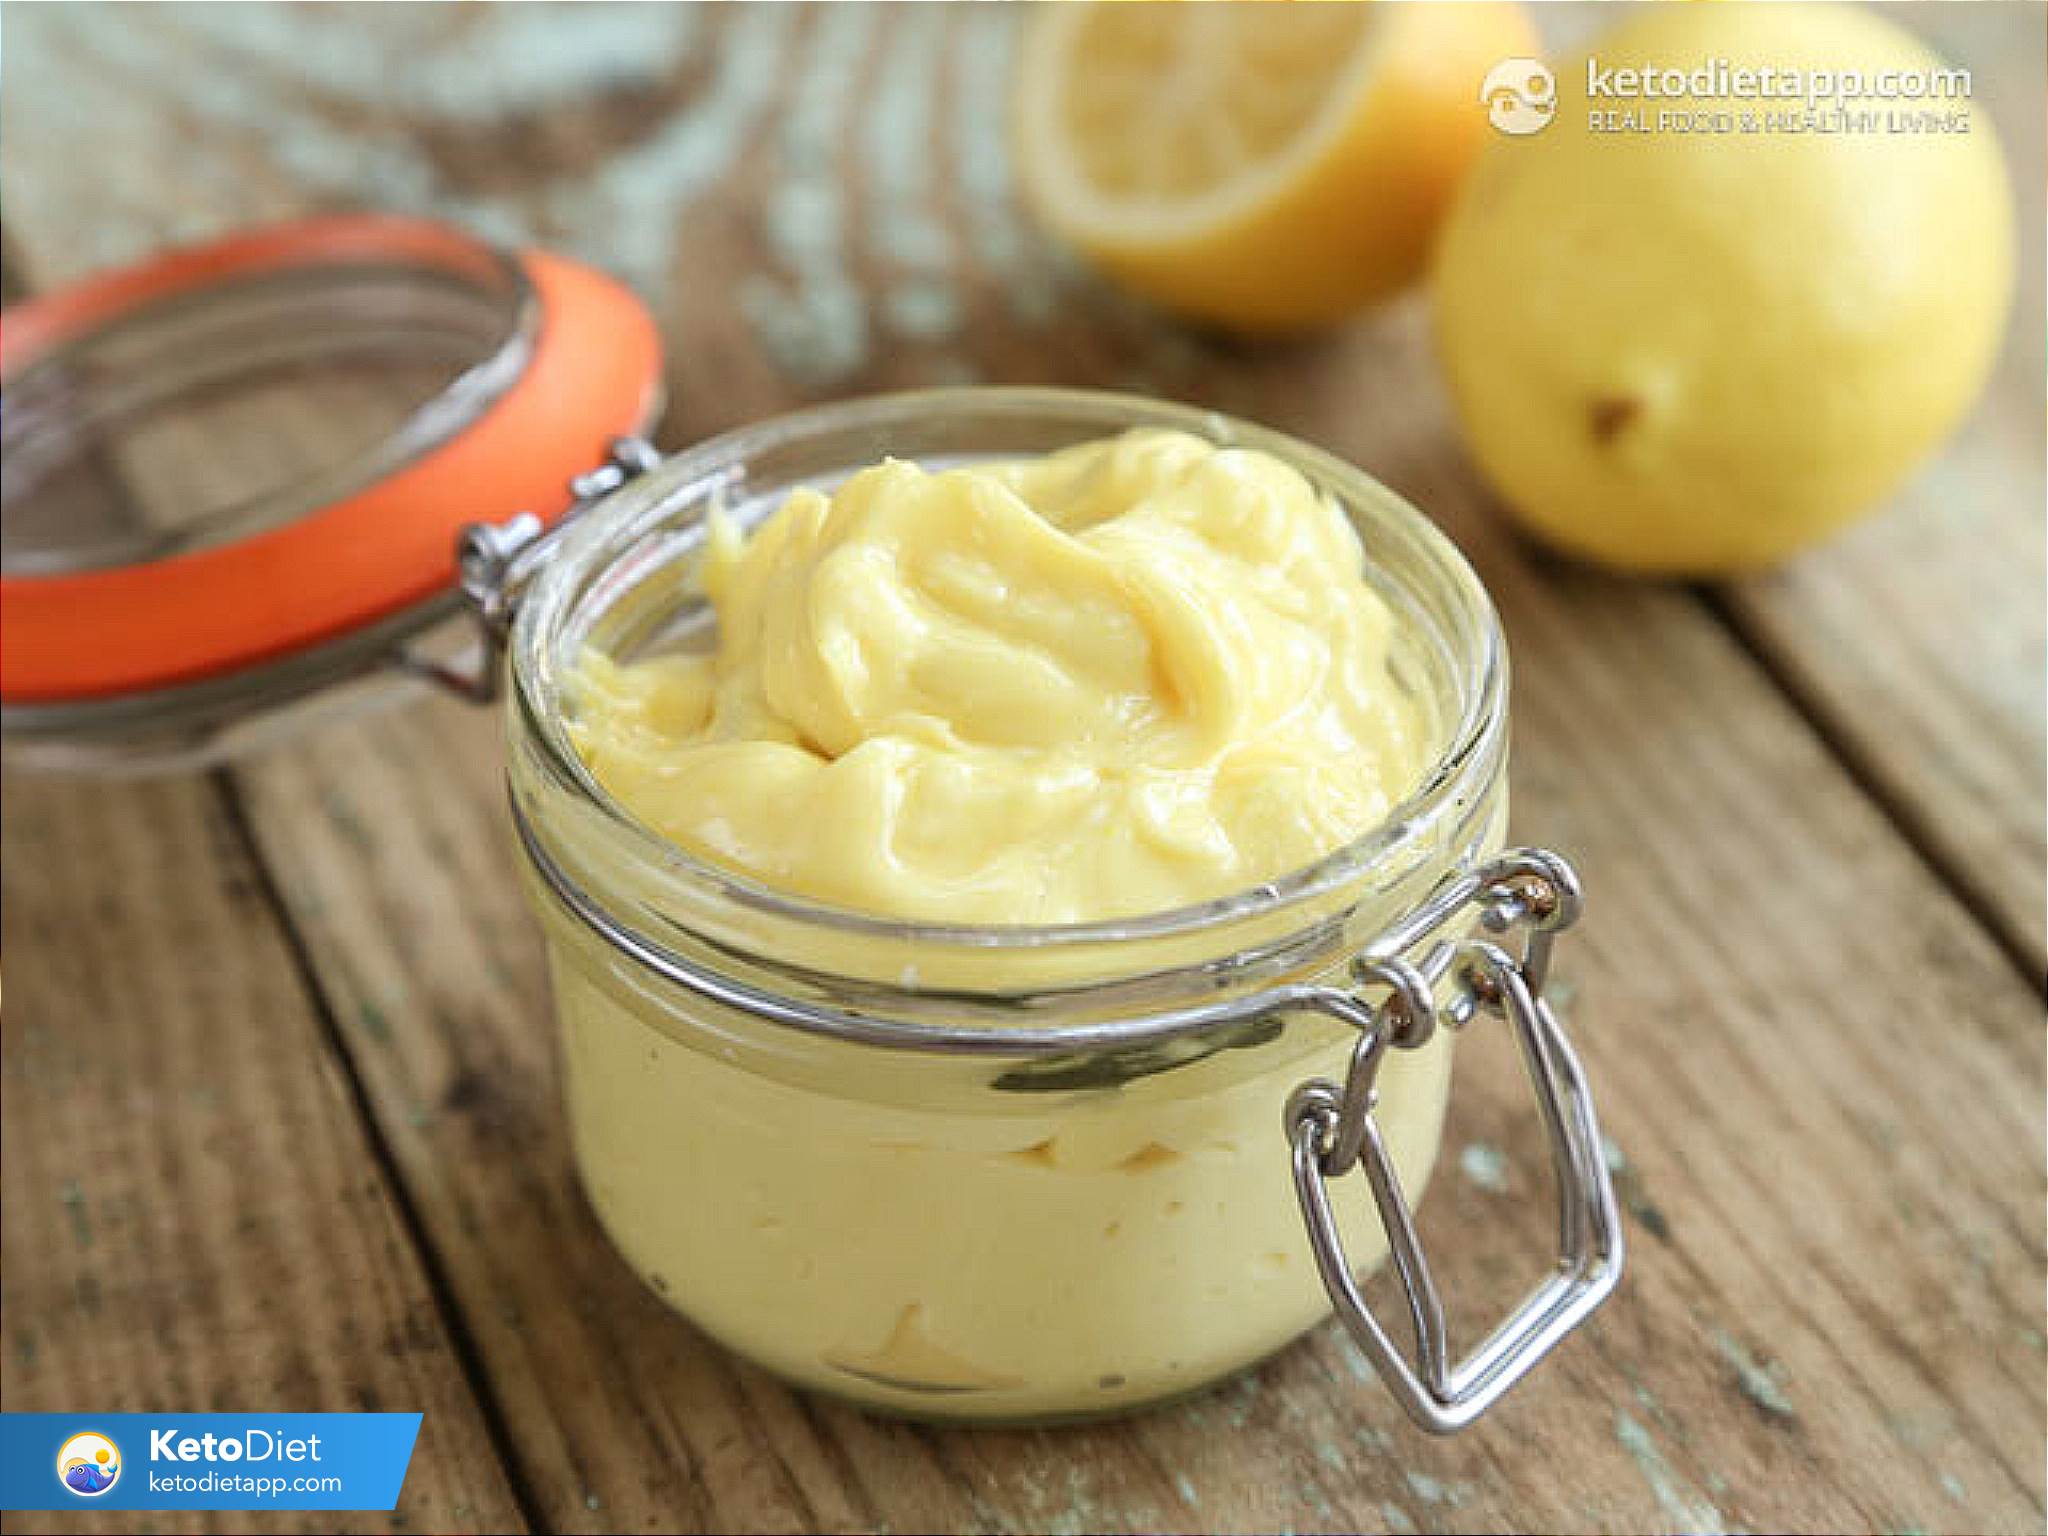 How to Make Mayonnaise